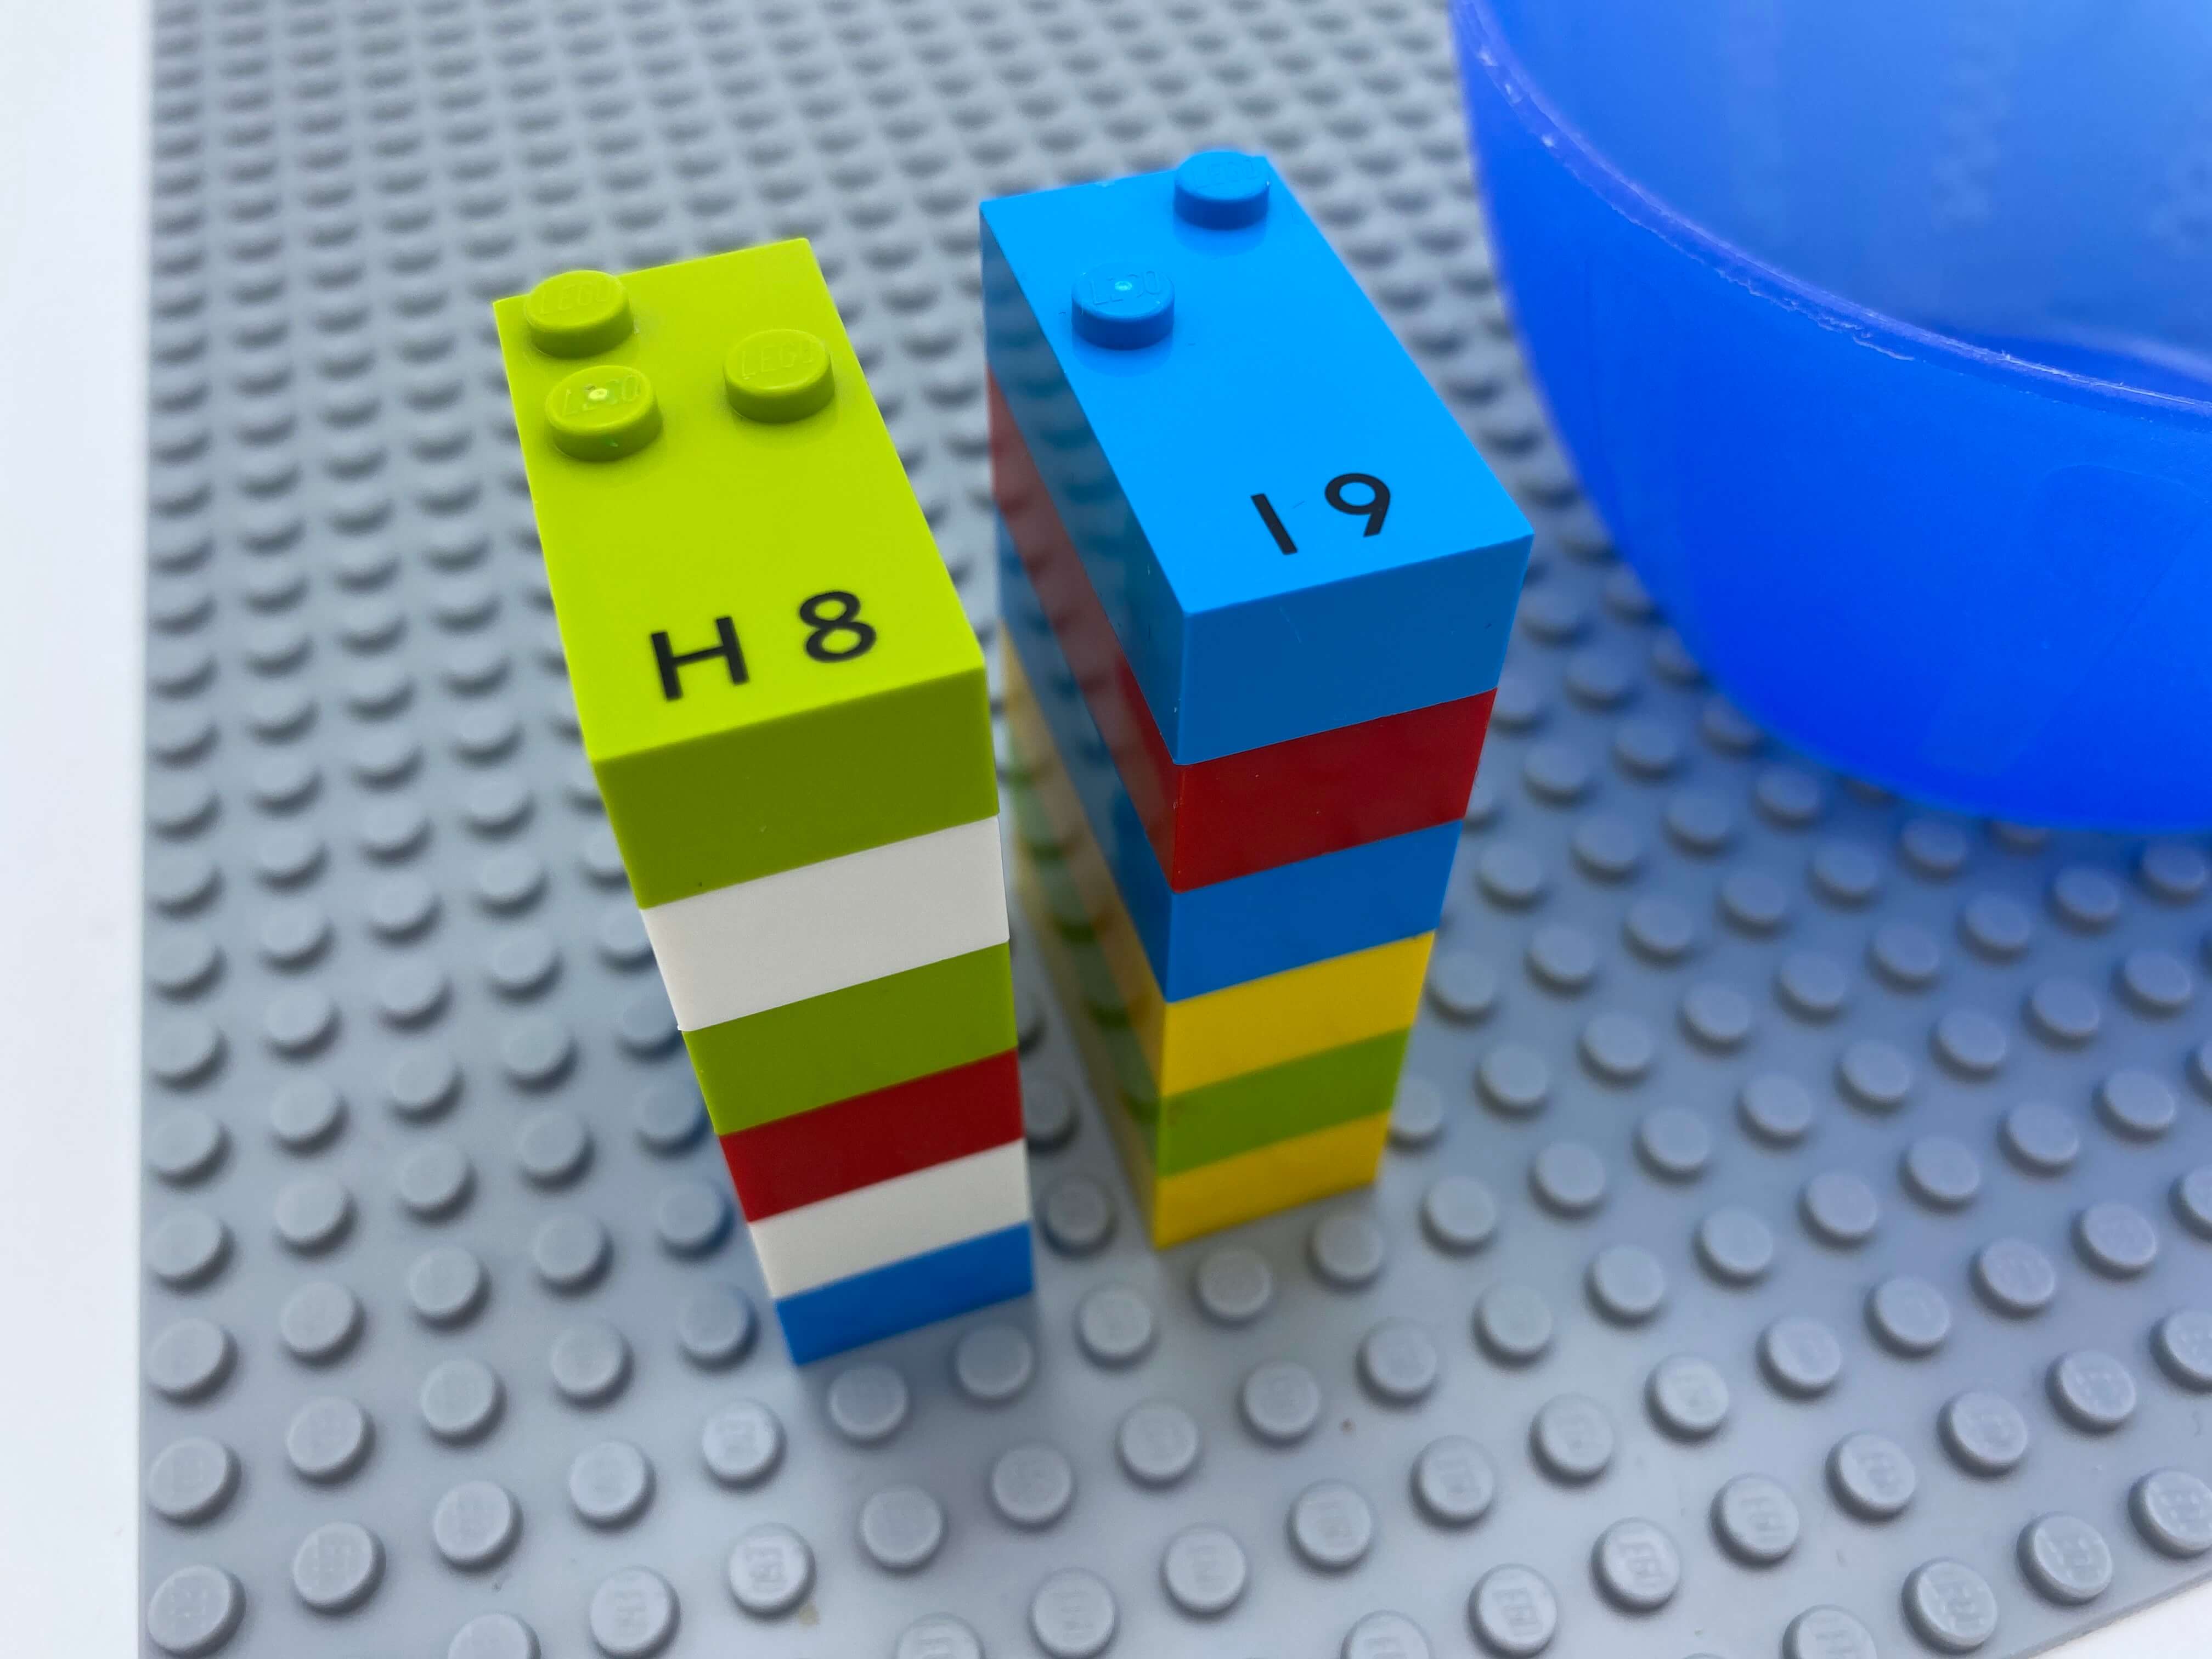 2 towers of 6 letter bricks each. One tower of vowels (h on top), one of consonants (i on top).